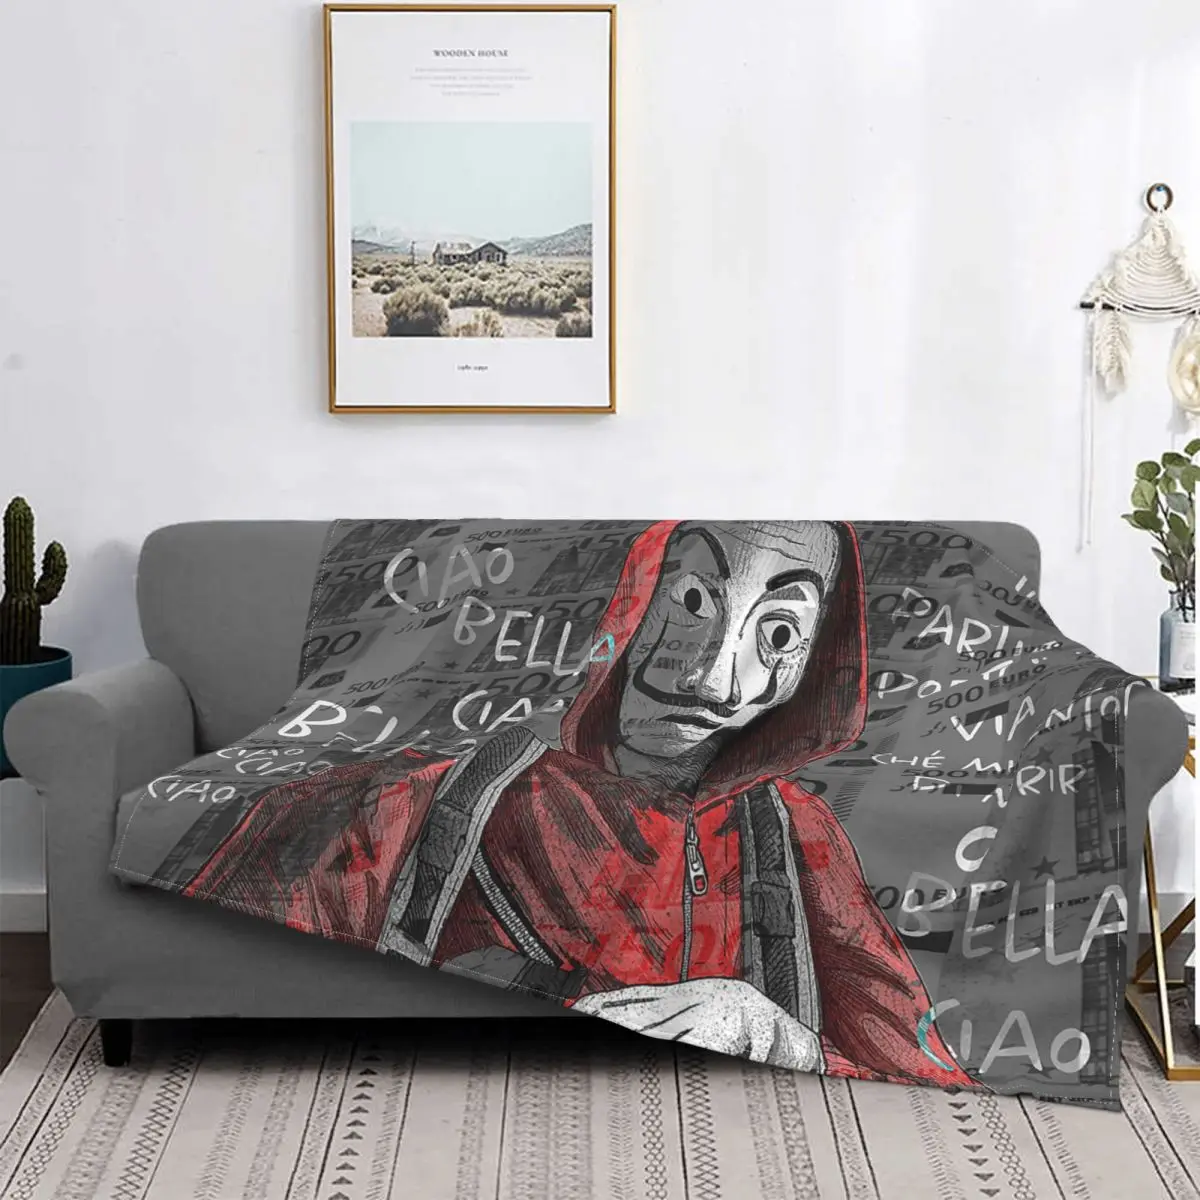 Bella Ciao Flannel Blankets La Casa De Papel Creative Throw Blanket for Bed Sofa Couch 200x150cm Plush Thin Quilt